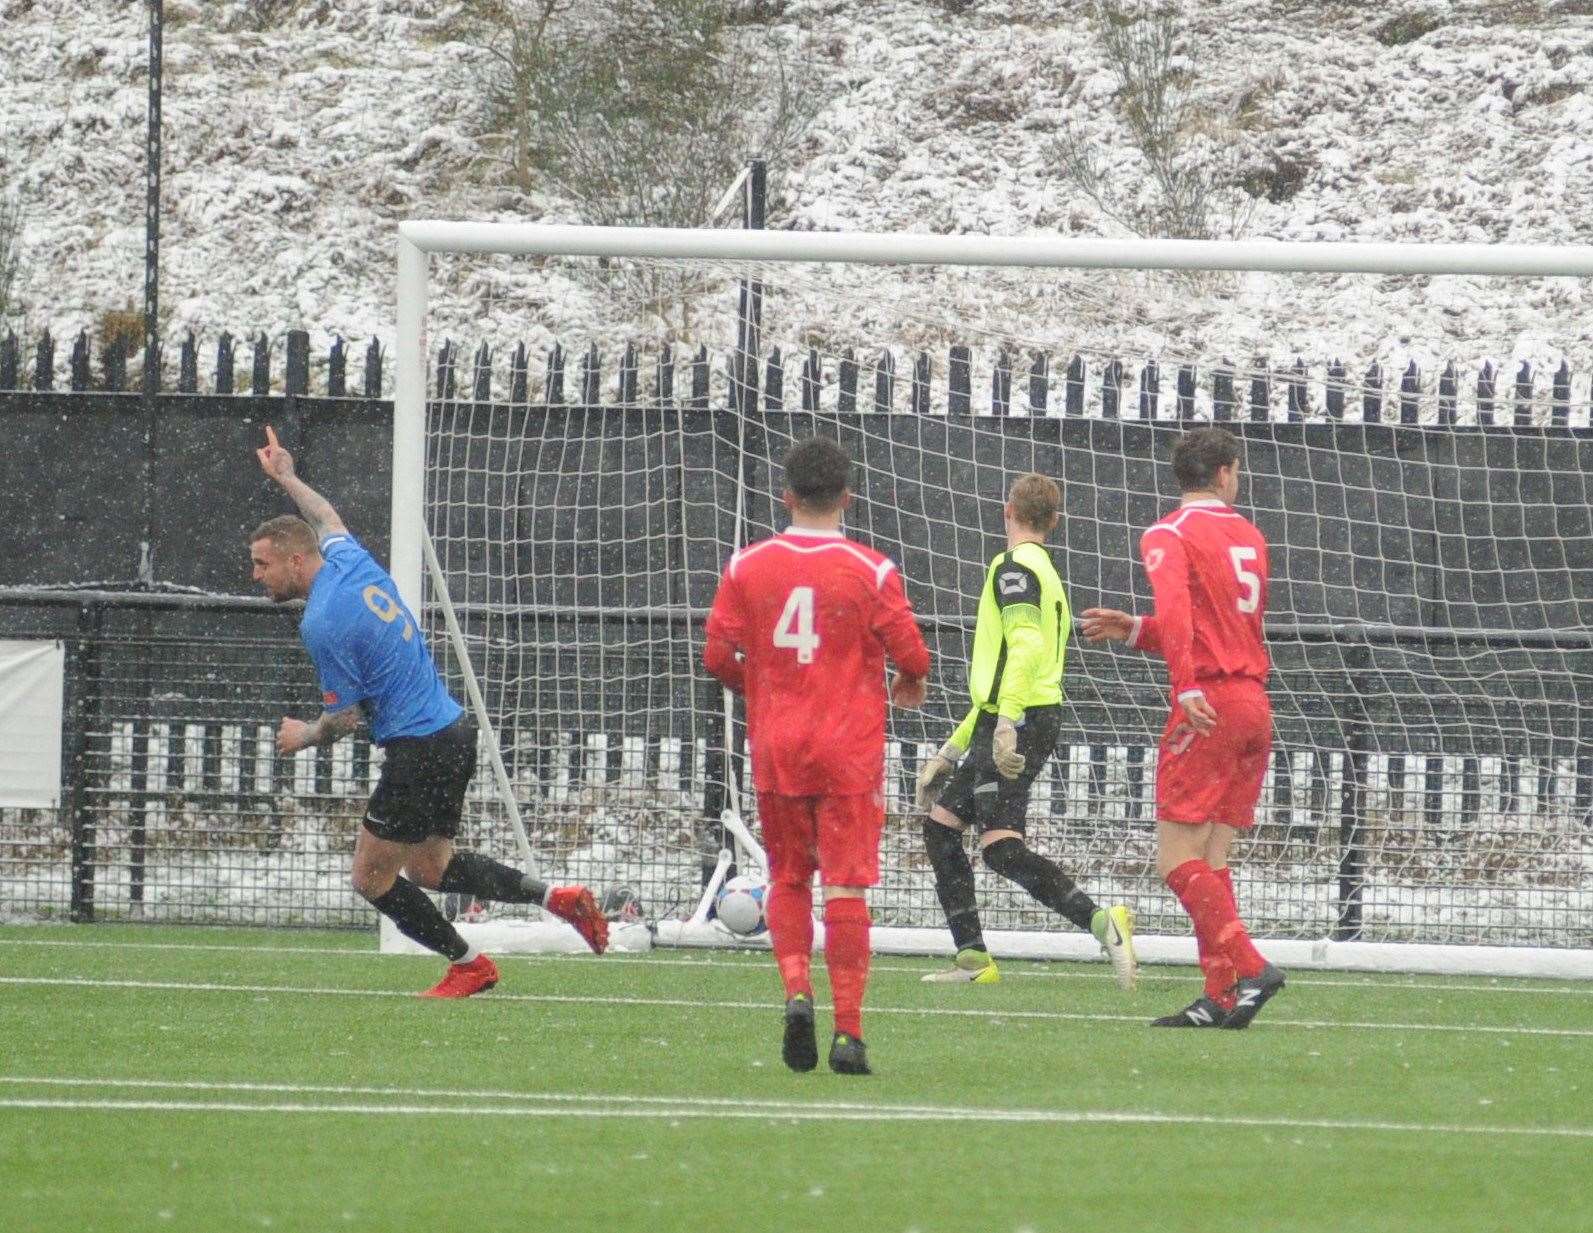 A snowy March day in Gillingham as Sevenoaks Town romp to a 6-0 win over Hollands & Blair Picture: Steve Crispe